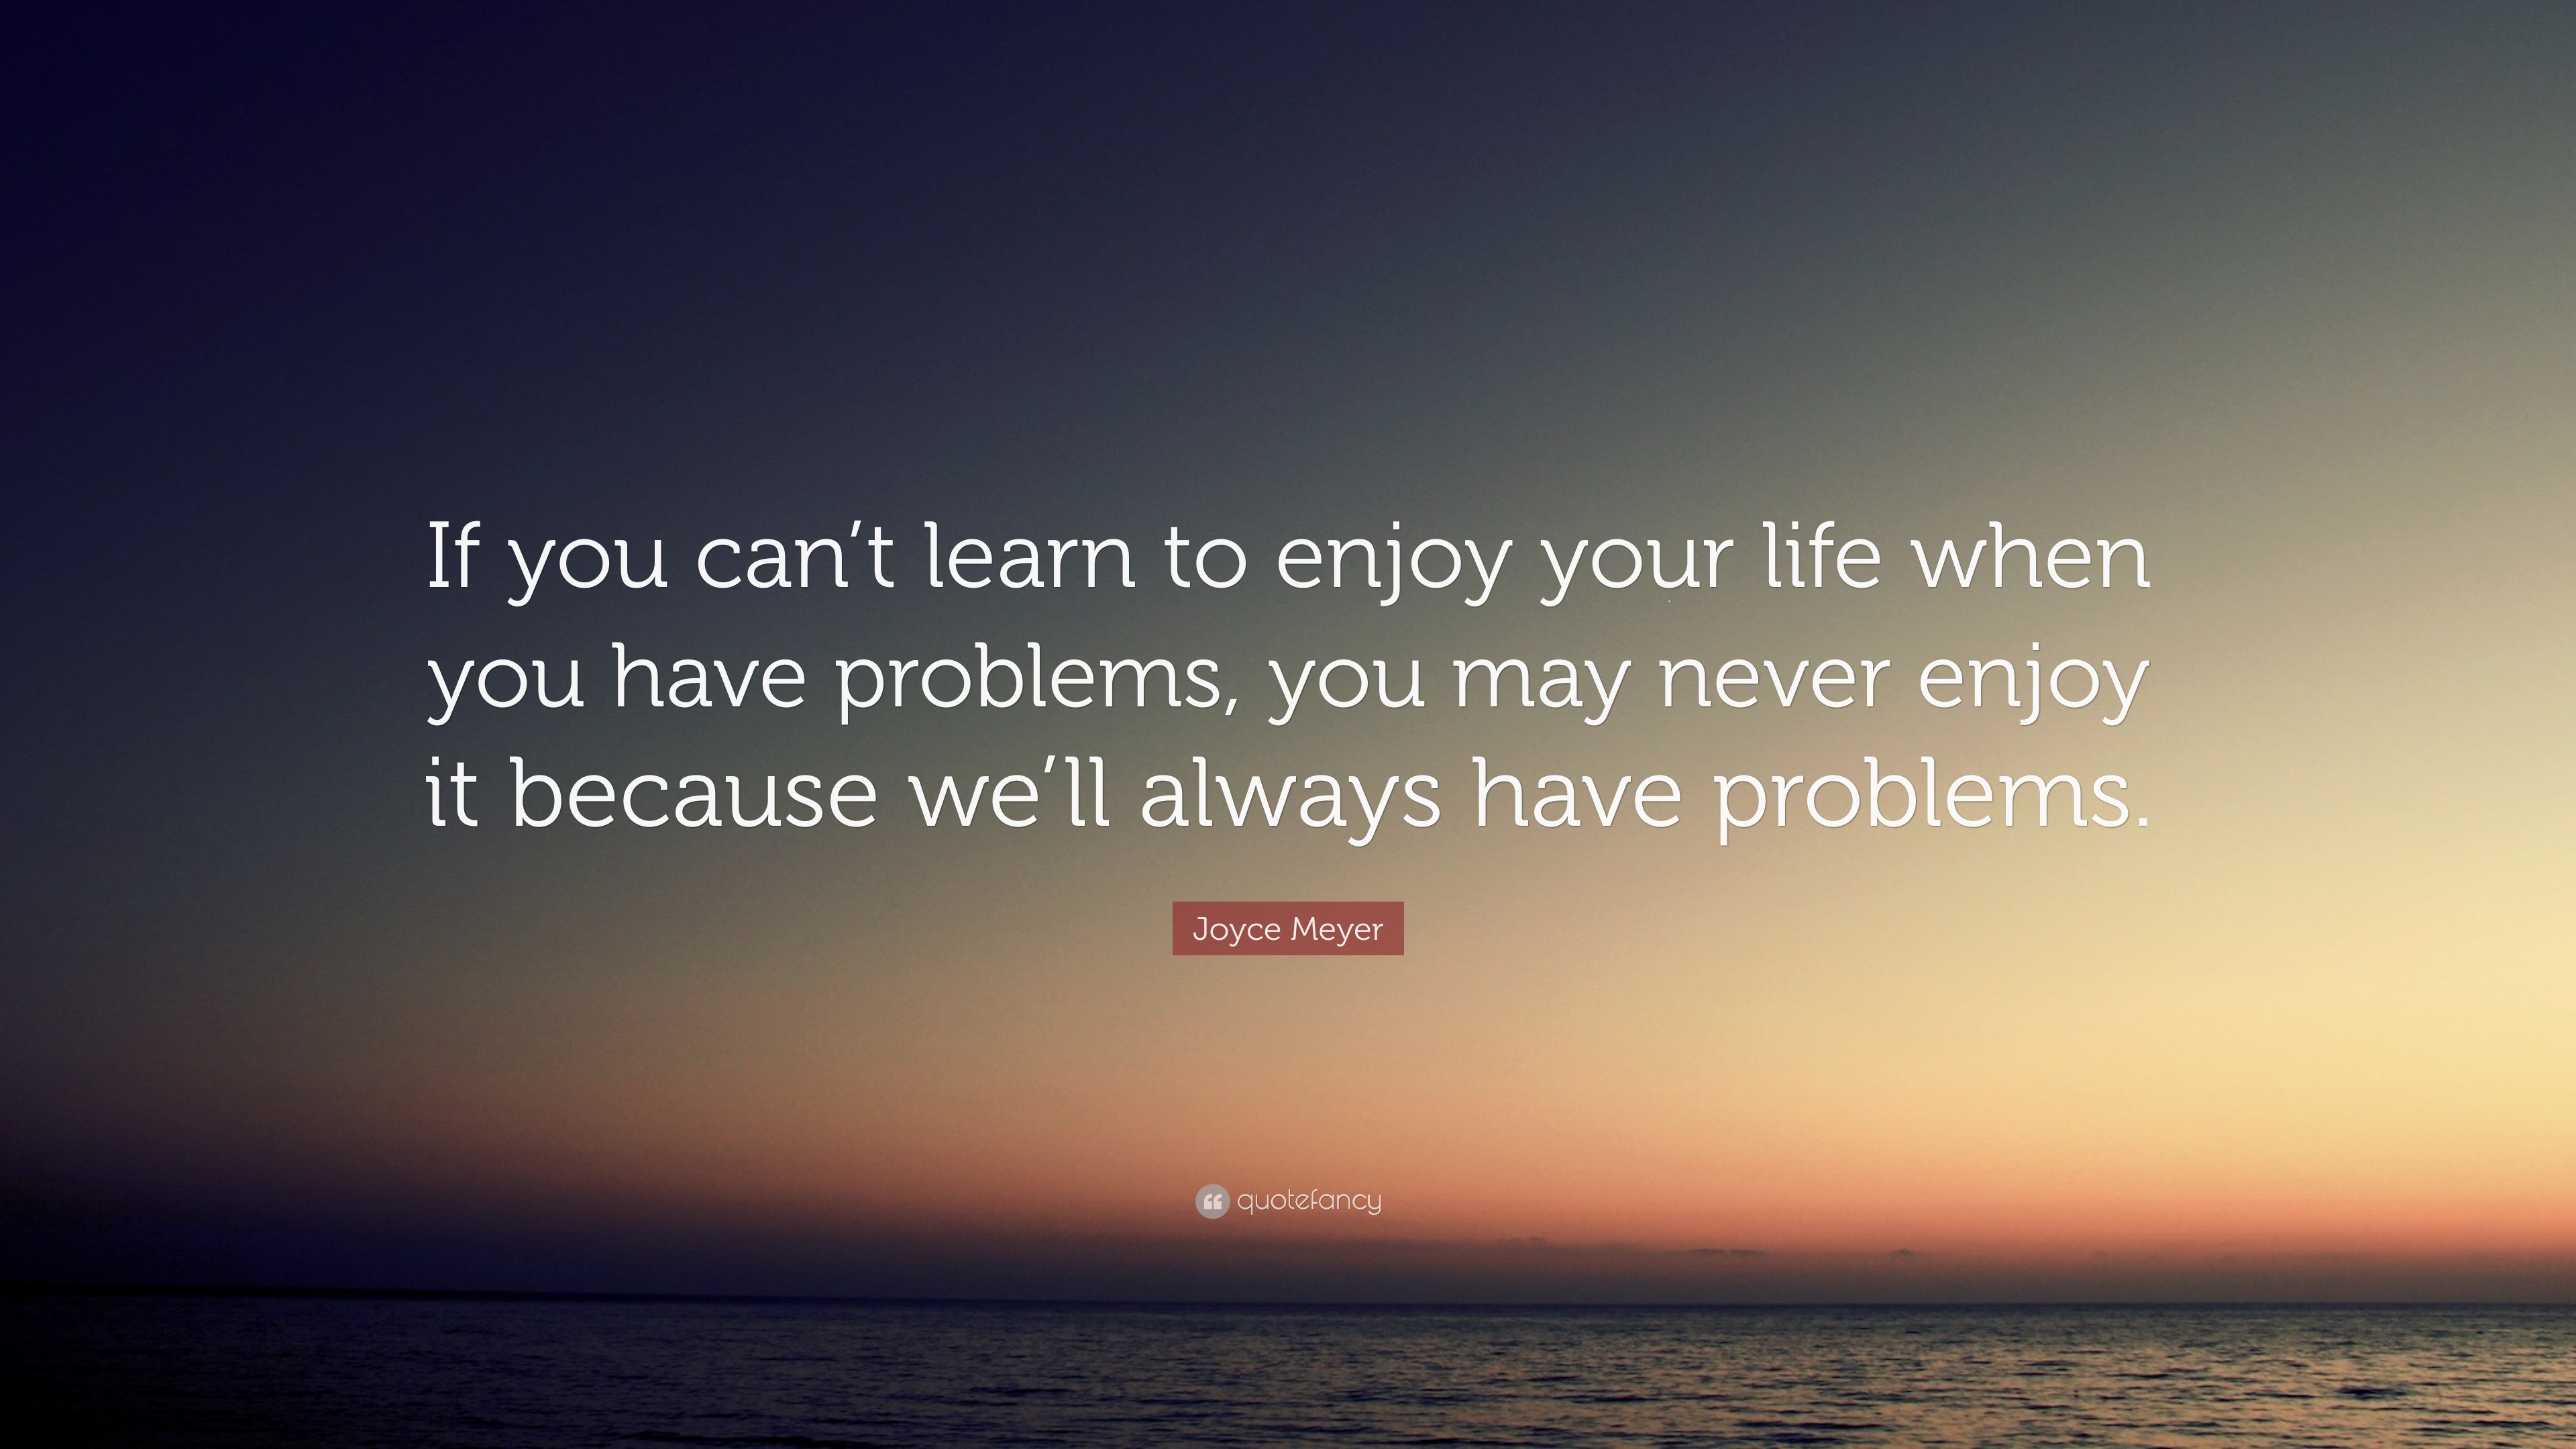 Joyce Meyer Quote “If you can t learn to enjoy your life when